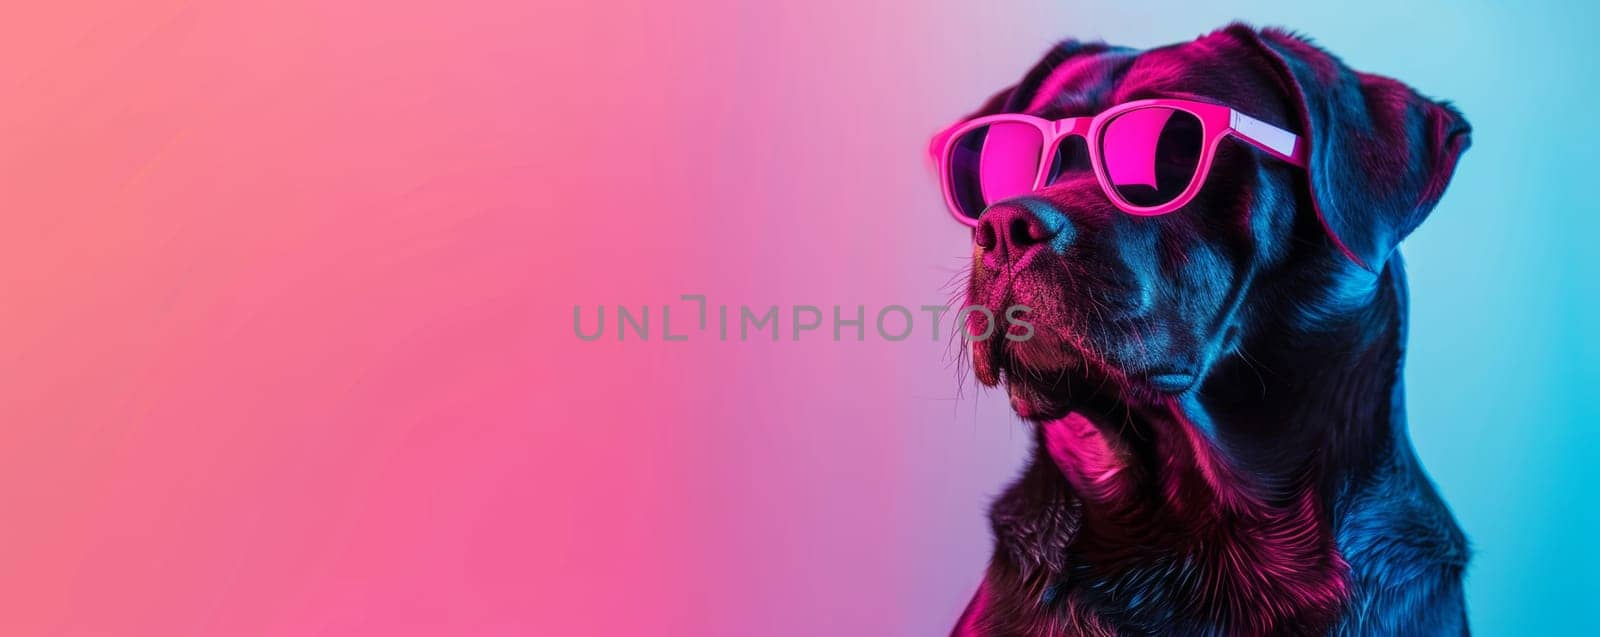 Black dog wearing pink sunglasses against a neon pink and blue background.